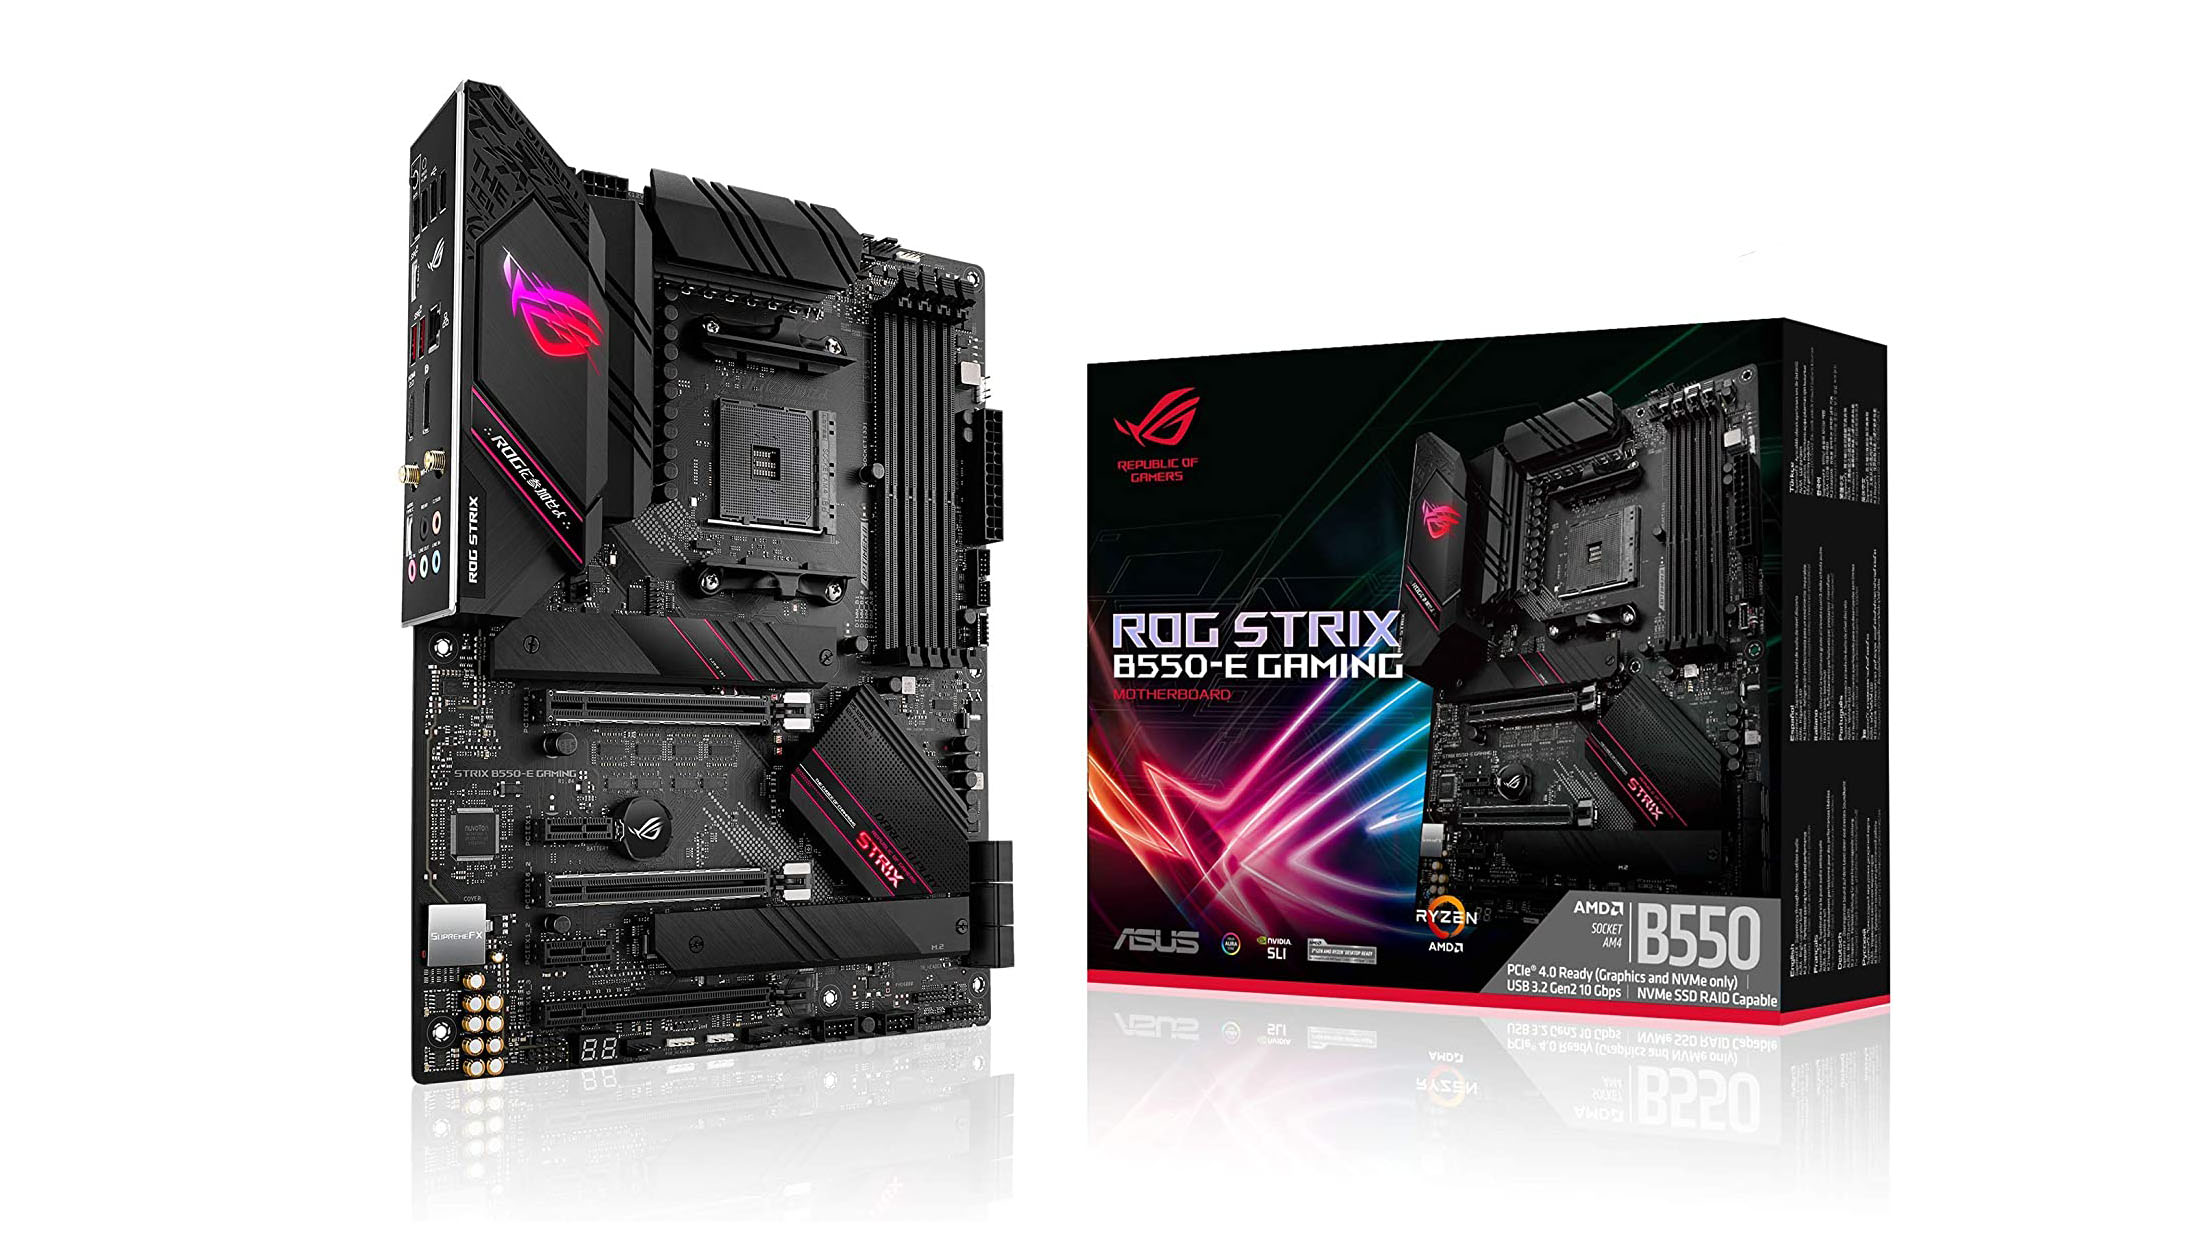 Pair that AMD 3rd gen Ryzen chip you just bought with the Asus ROG Strix B550-E Gaming motherboard.